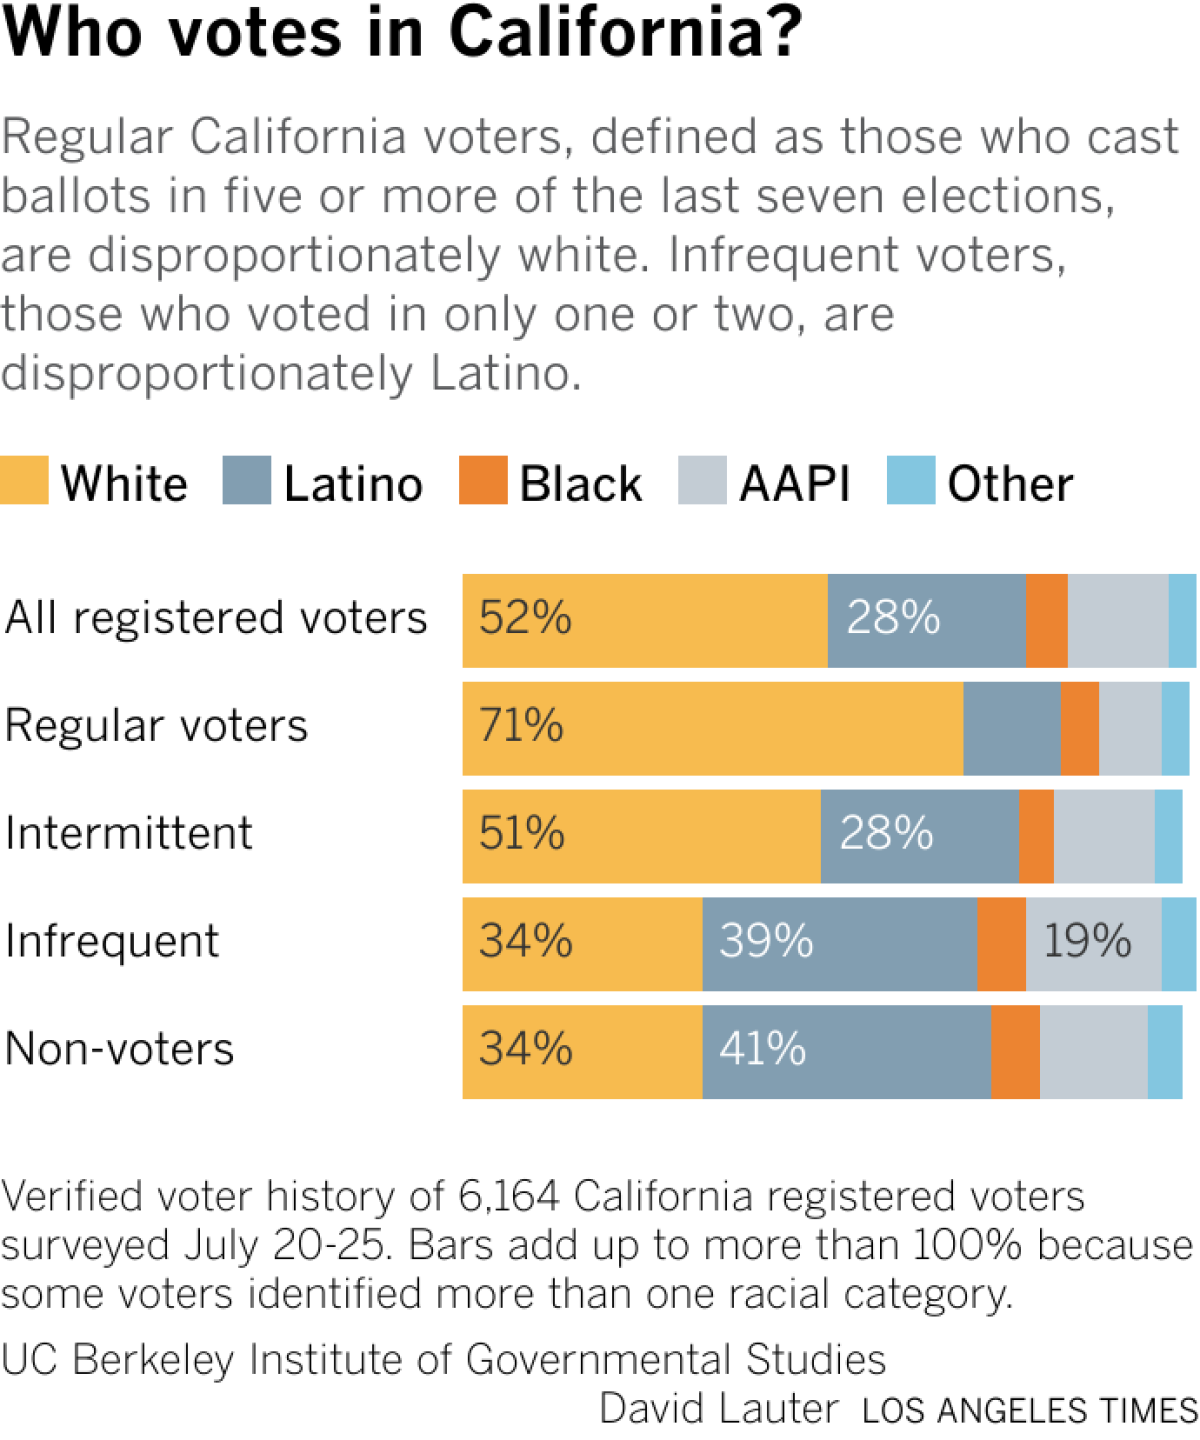 Regular California voters, defined as those who cast ballots in five or more of the last seven elections, are disproportionately white. Infrequent voters, those who voted in only one or two, are disproportionately Latino.